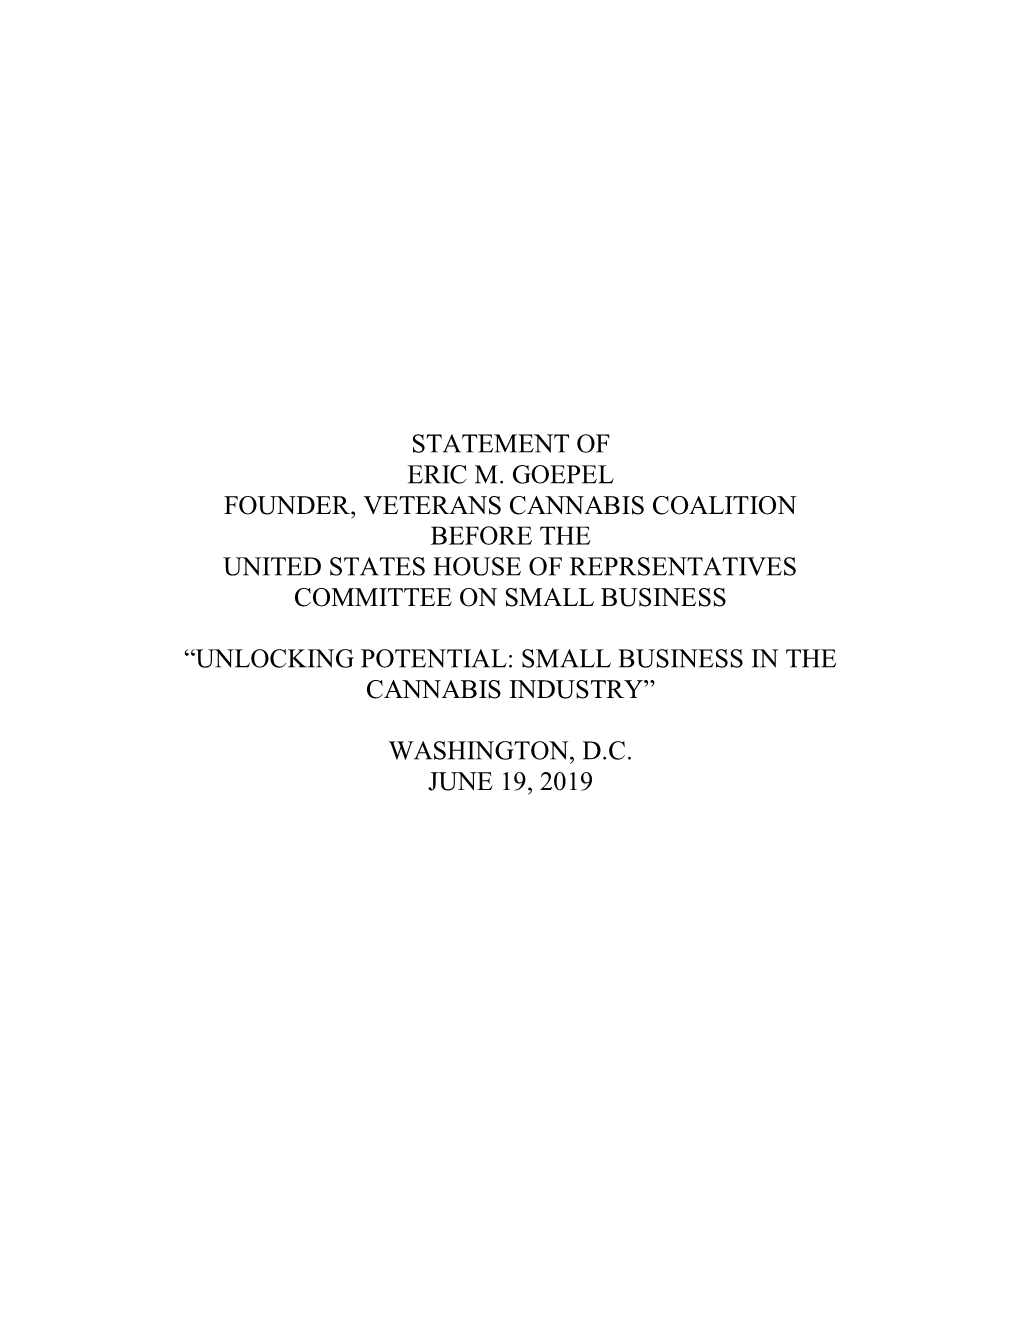 Statement of Eric M. Goepel Founder, Veterans Cannabis Coalition Before the United States House of Reprsentatives Committee on Small Business